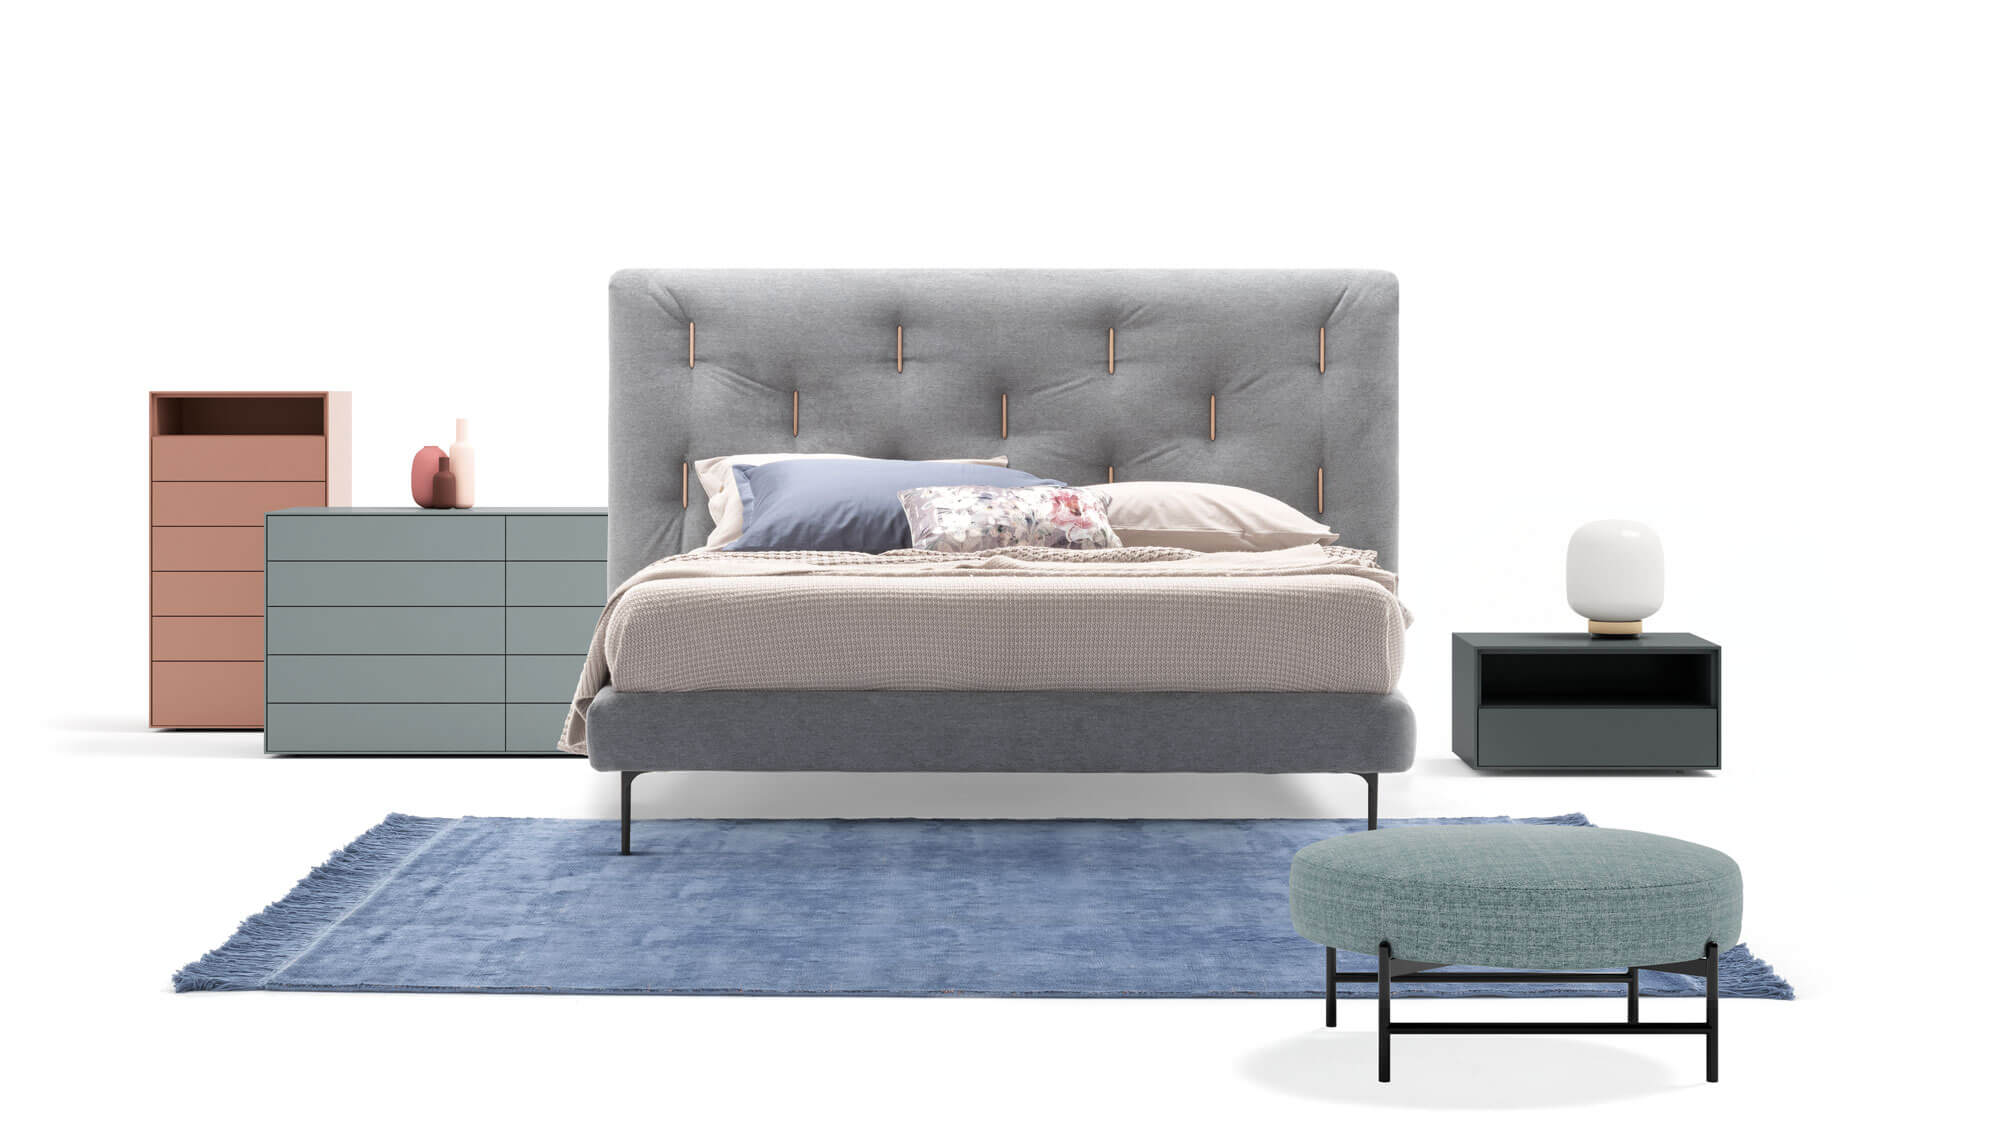 Bedroom with Bars bed, Kompos night storage units and Supernova pouf | Dallagnese